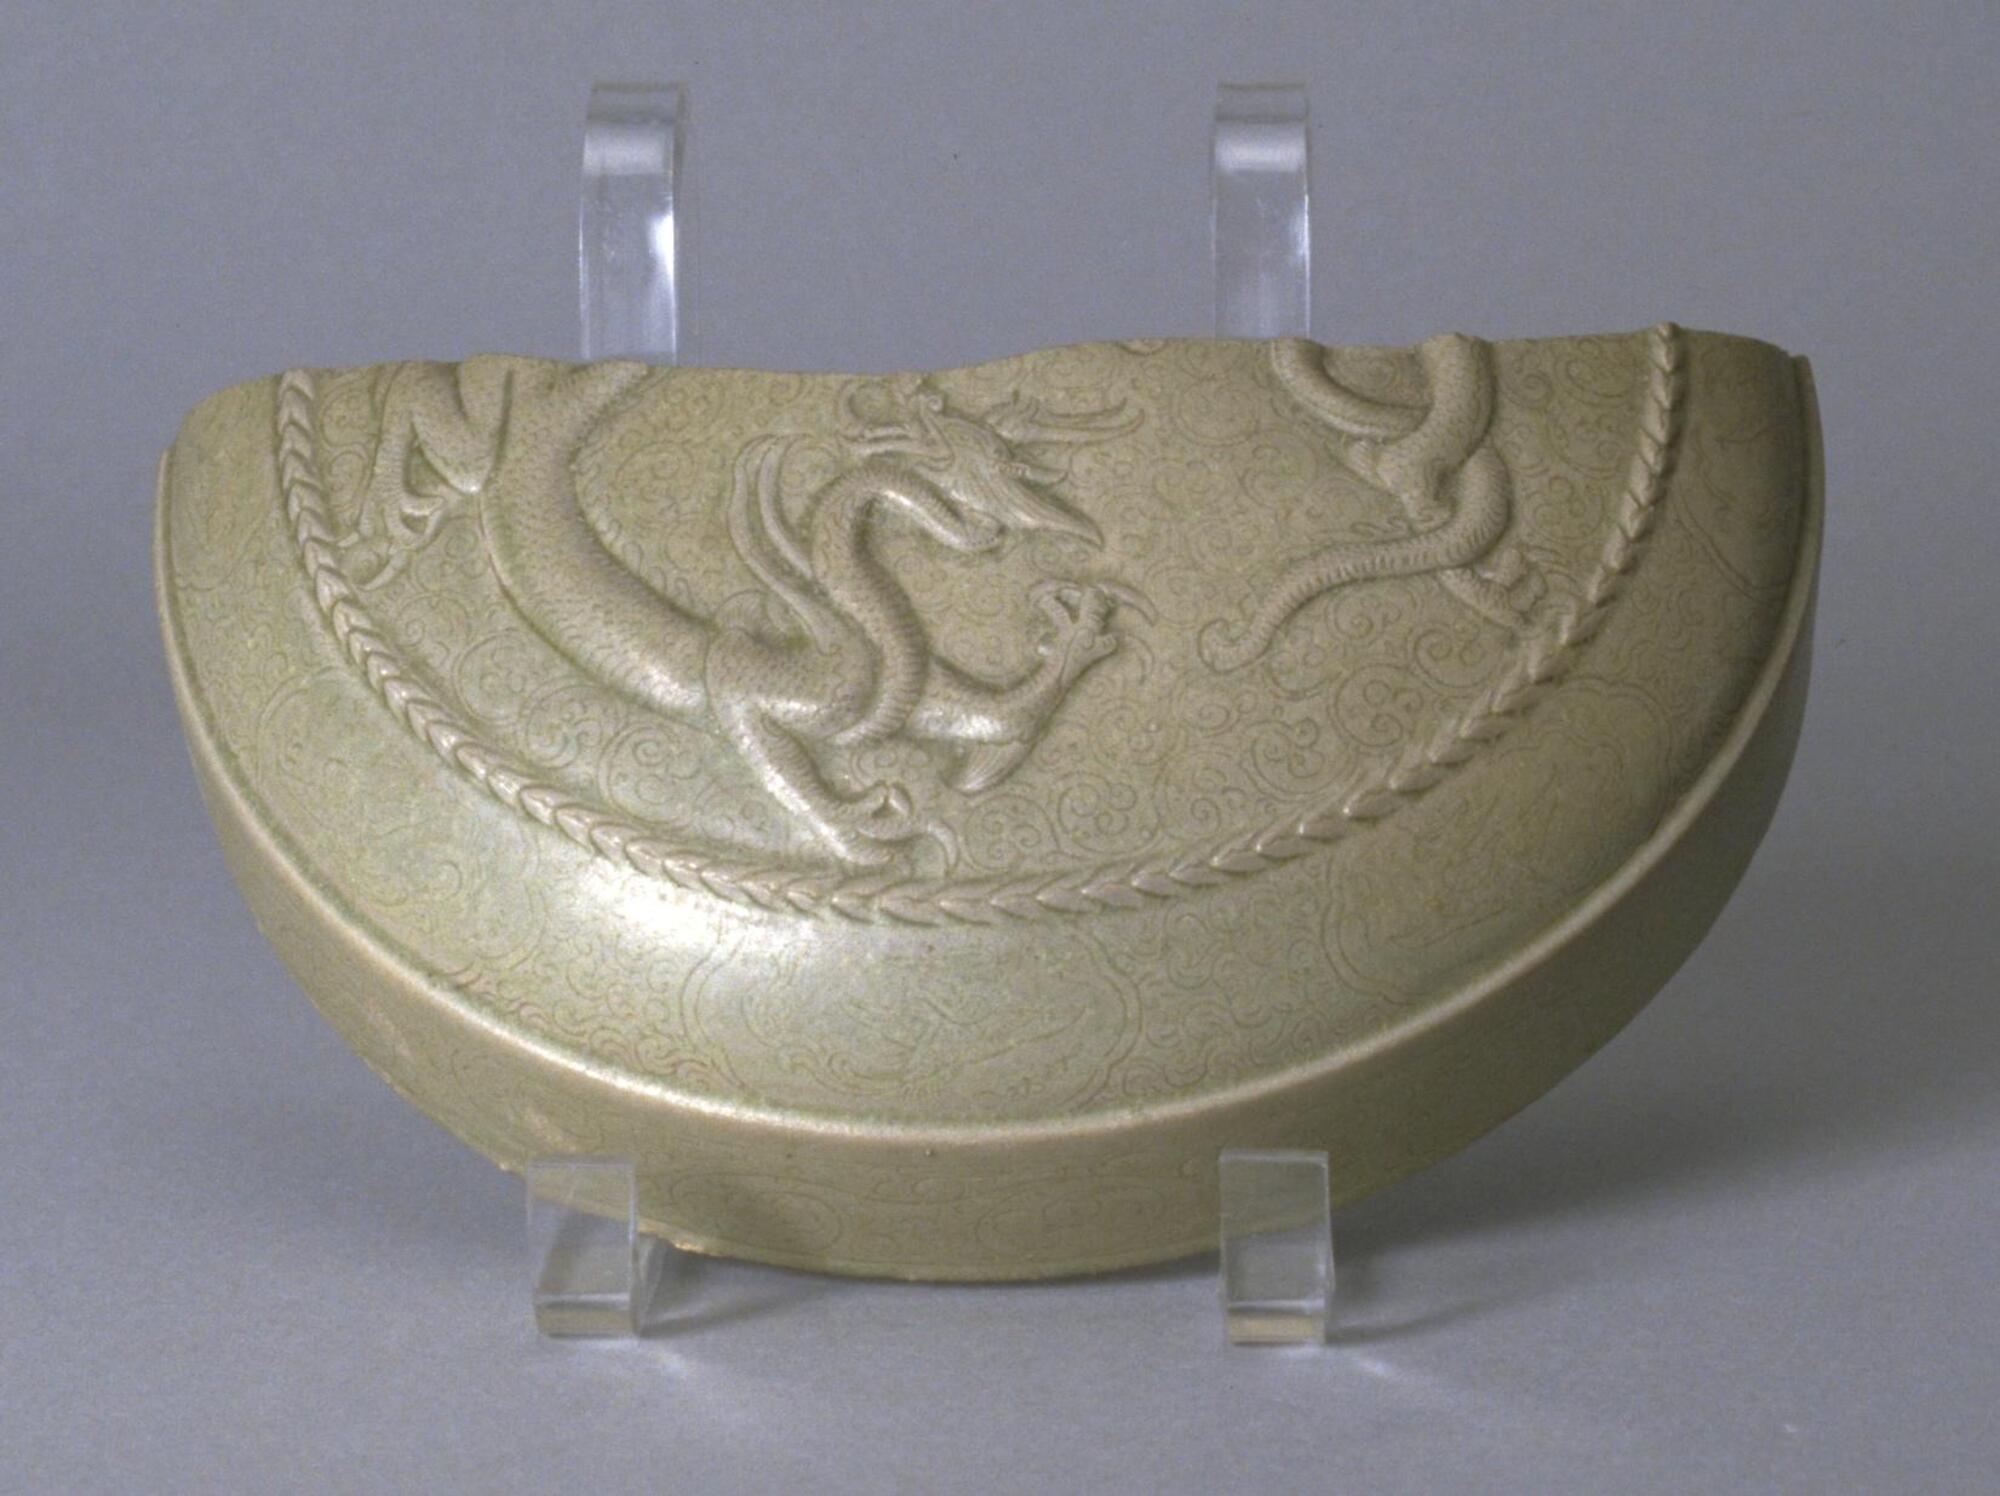 This fragment of a stoneware box lid has straight sides with a shoulder curving to a flat top. The lid has a finely detailed dragon in relief inside a twisted rope roundel border against a ground of finely incised floral meander, covered in a light gray celadon glaze. 